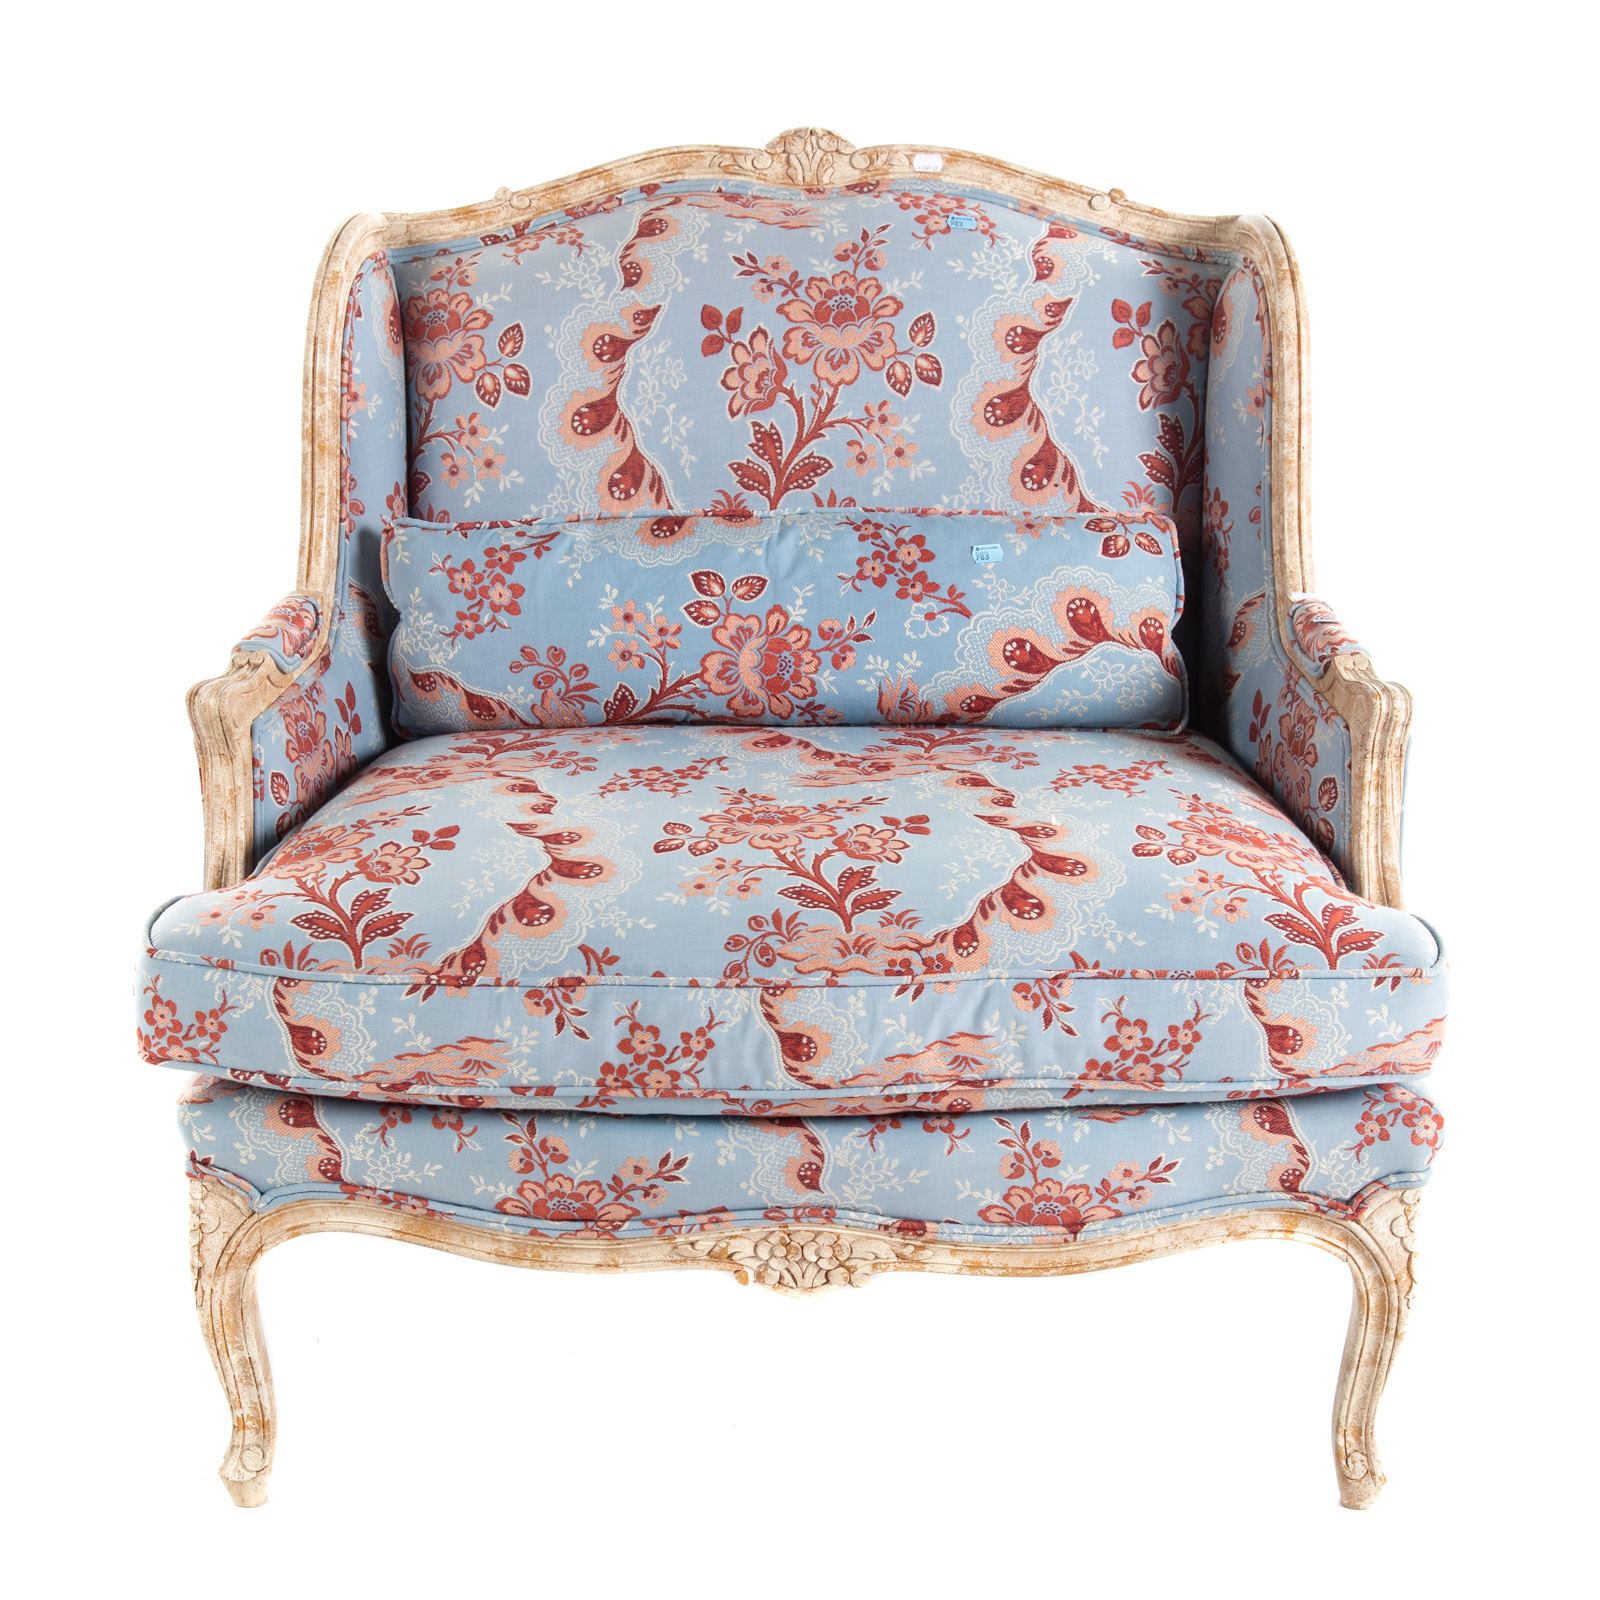 LOUIS XV STYLE UPHOLSTERED ARMCHAIR 36981e